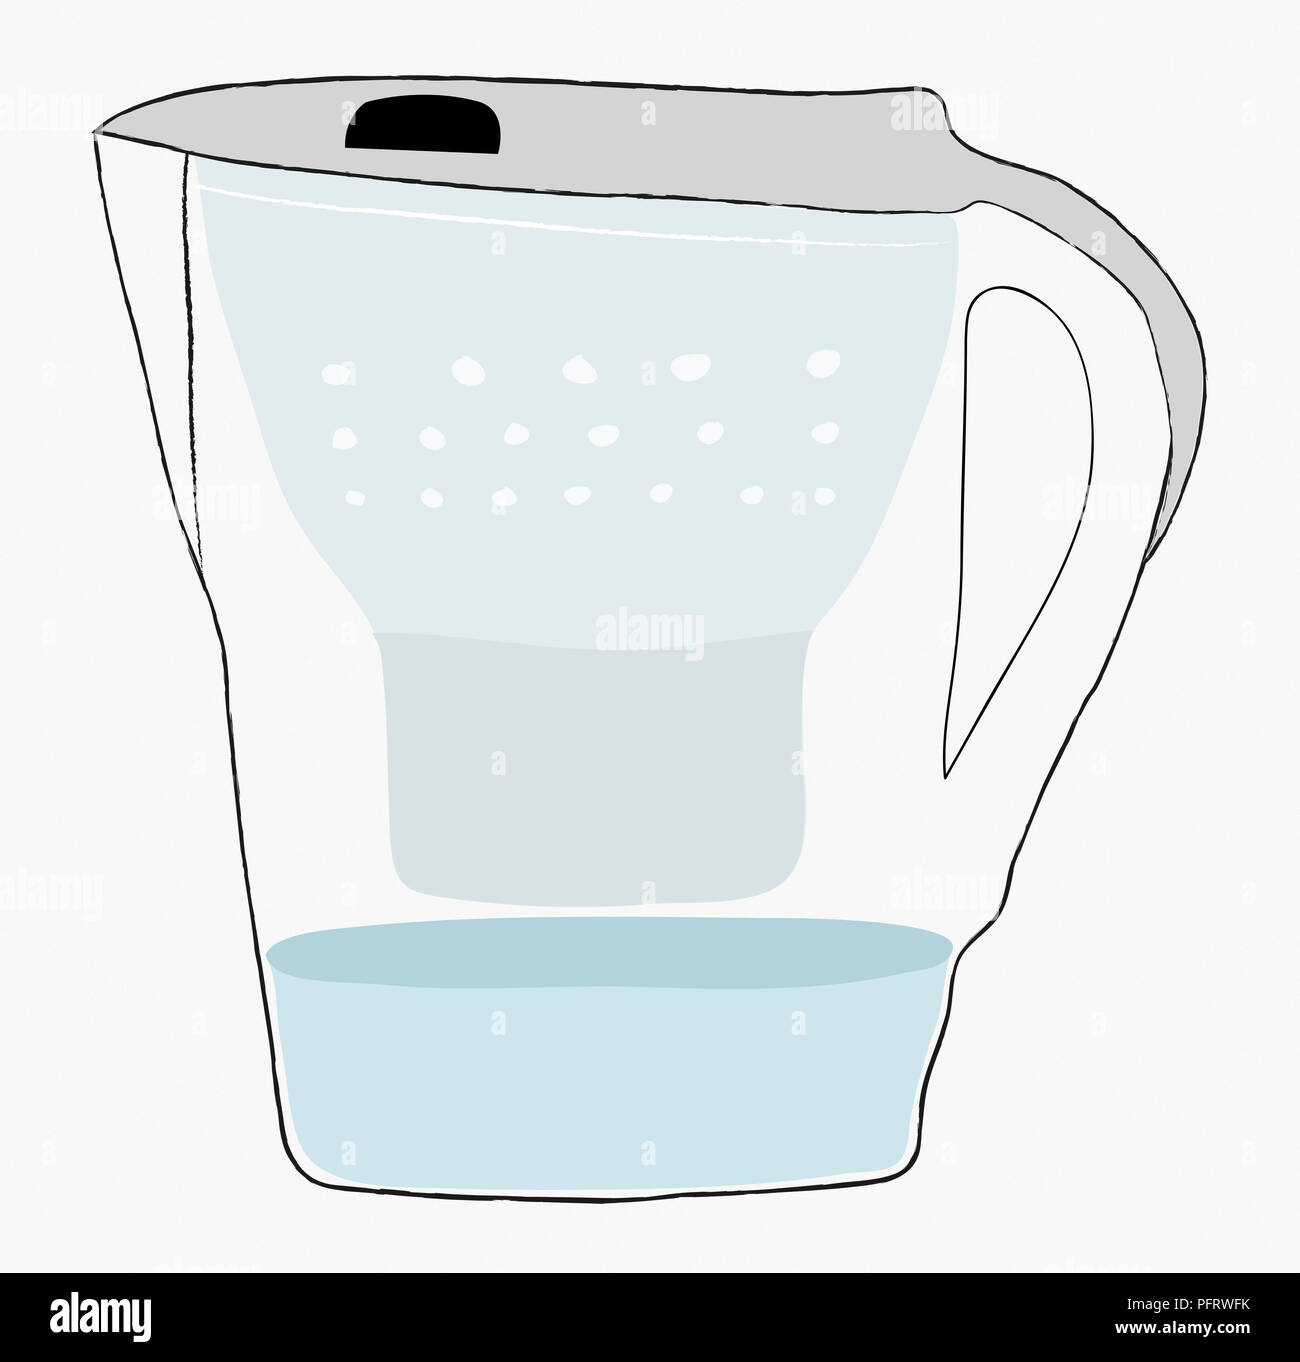 Illustration of a water filter Stock Photo